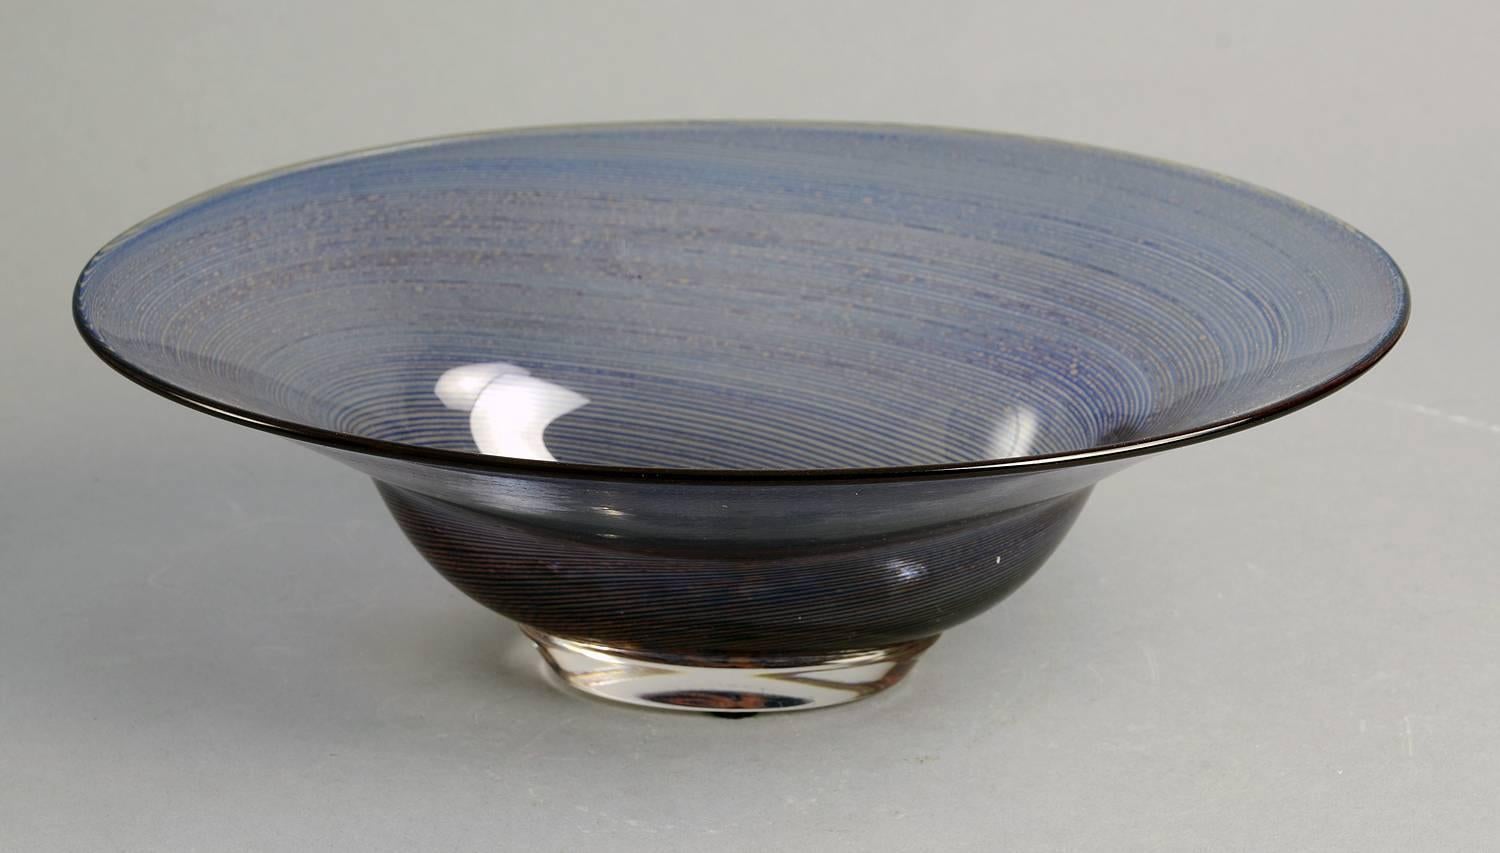 Edward Hald for Orrefors, Sweden. "Aqua graal" footed bowl internally decorated with blue lines and red crushed glass, 1966. Signed and dated.
Engraved "Aqua graal Edward Hald, 1966" to base. 
Height 3 1/4" (8 cm) width 10